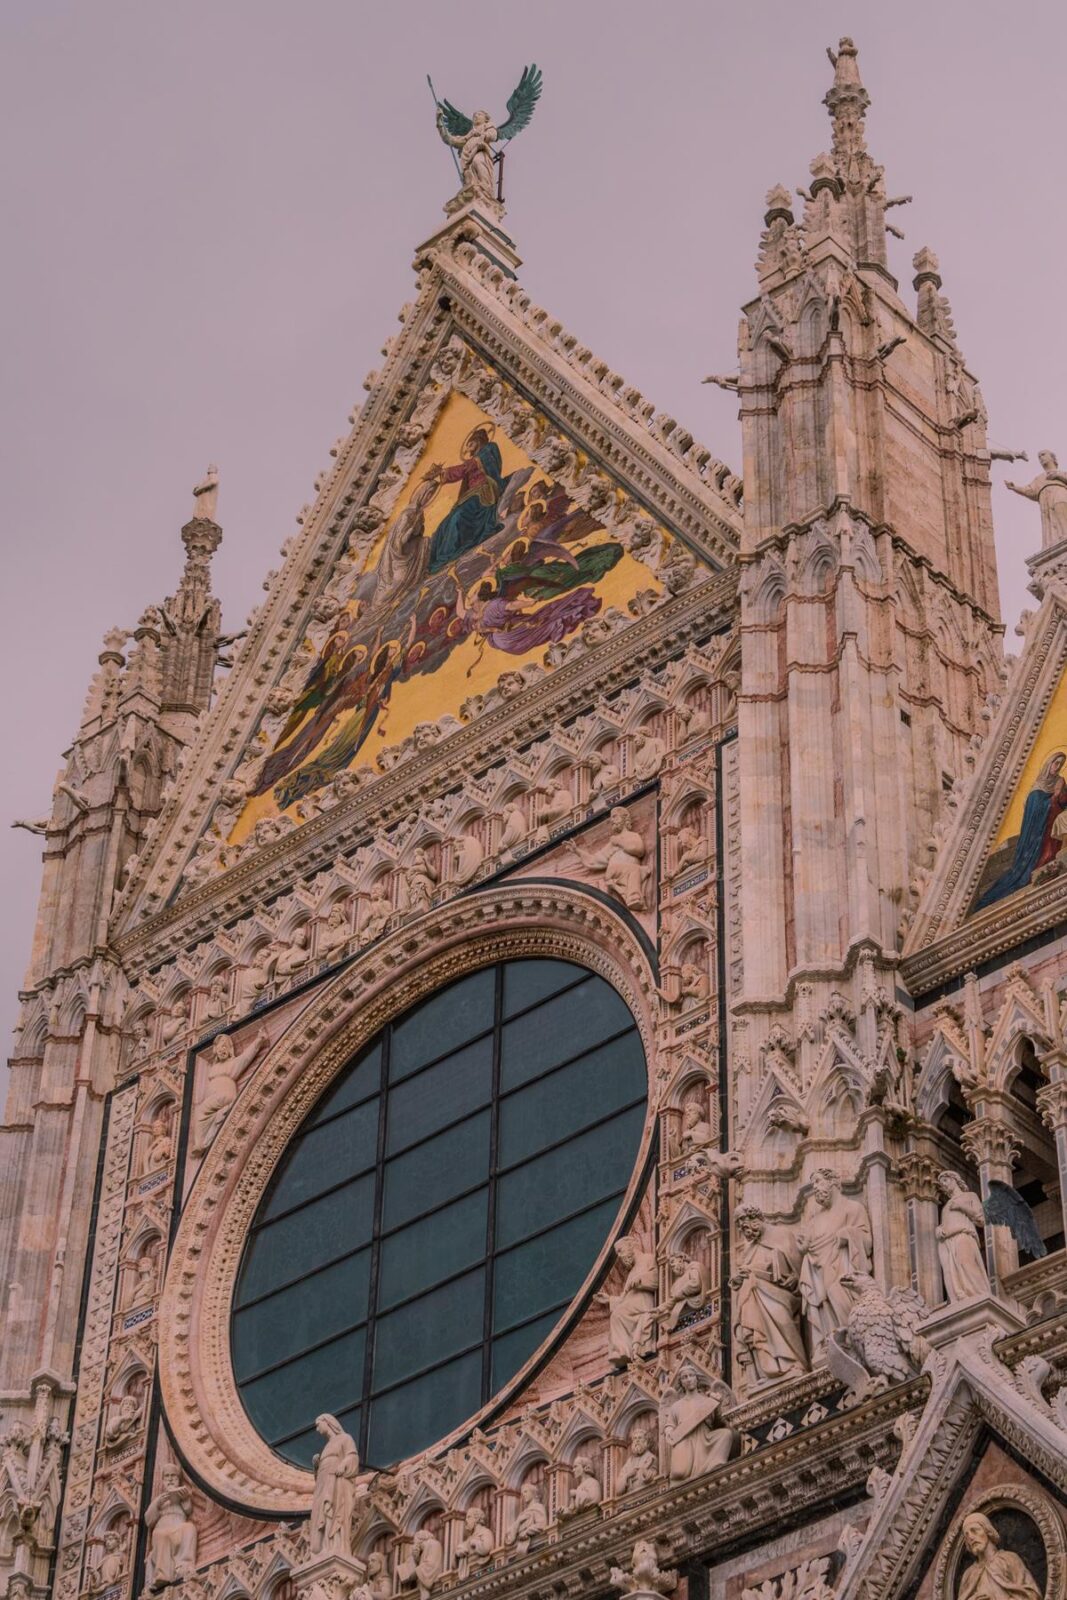 Siena Cathedral Gothic facade, rose window, and sculptures against moody sky